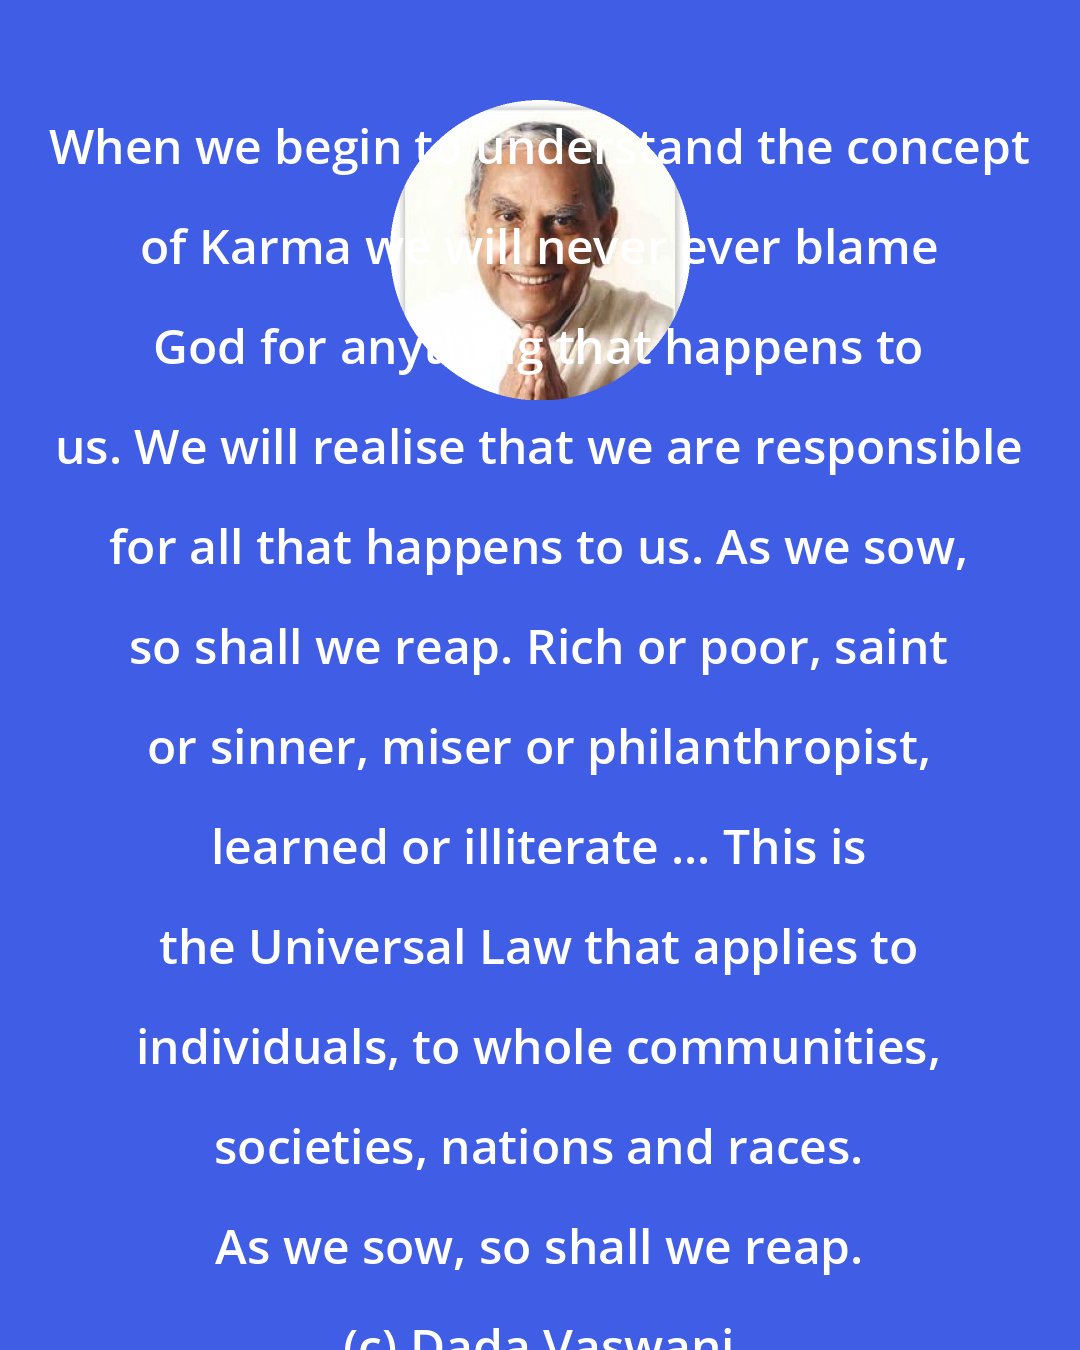 Dada Vaswani: When we begin to understand the concept of Karma we will never ever blame God for anything that happens to us. We will realise that we are responsible for all that happens to us. As we sow, so shall we reap. Rich or poor, saint or sinner, miser or philanthropist, learned or illiterate ... This is the Universal Law that applies to individuals, to whole communities, societies, nations and races. As we sow, so shall we reap.